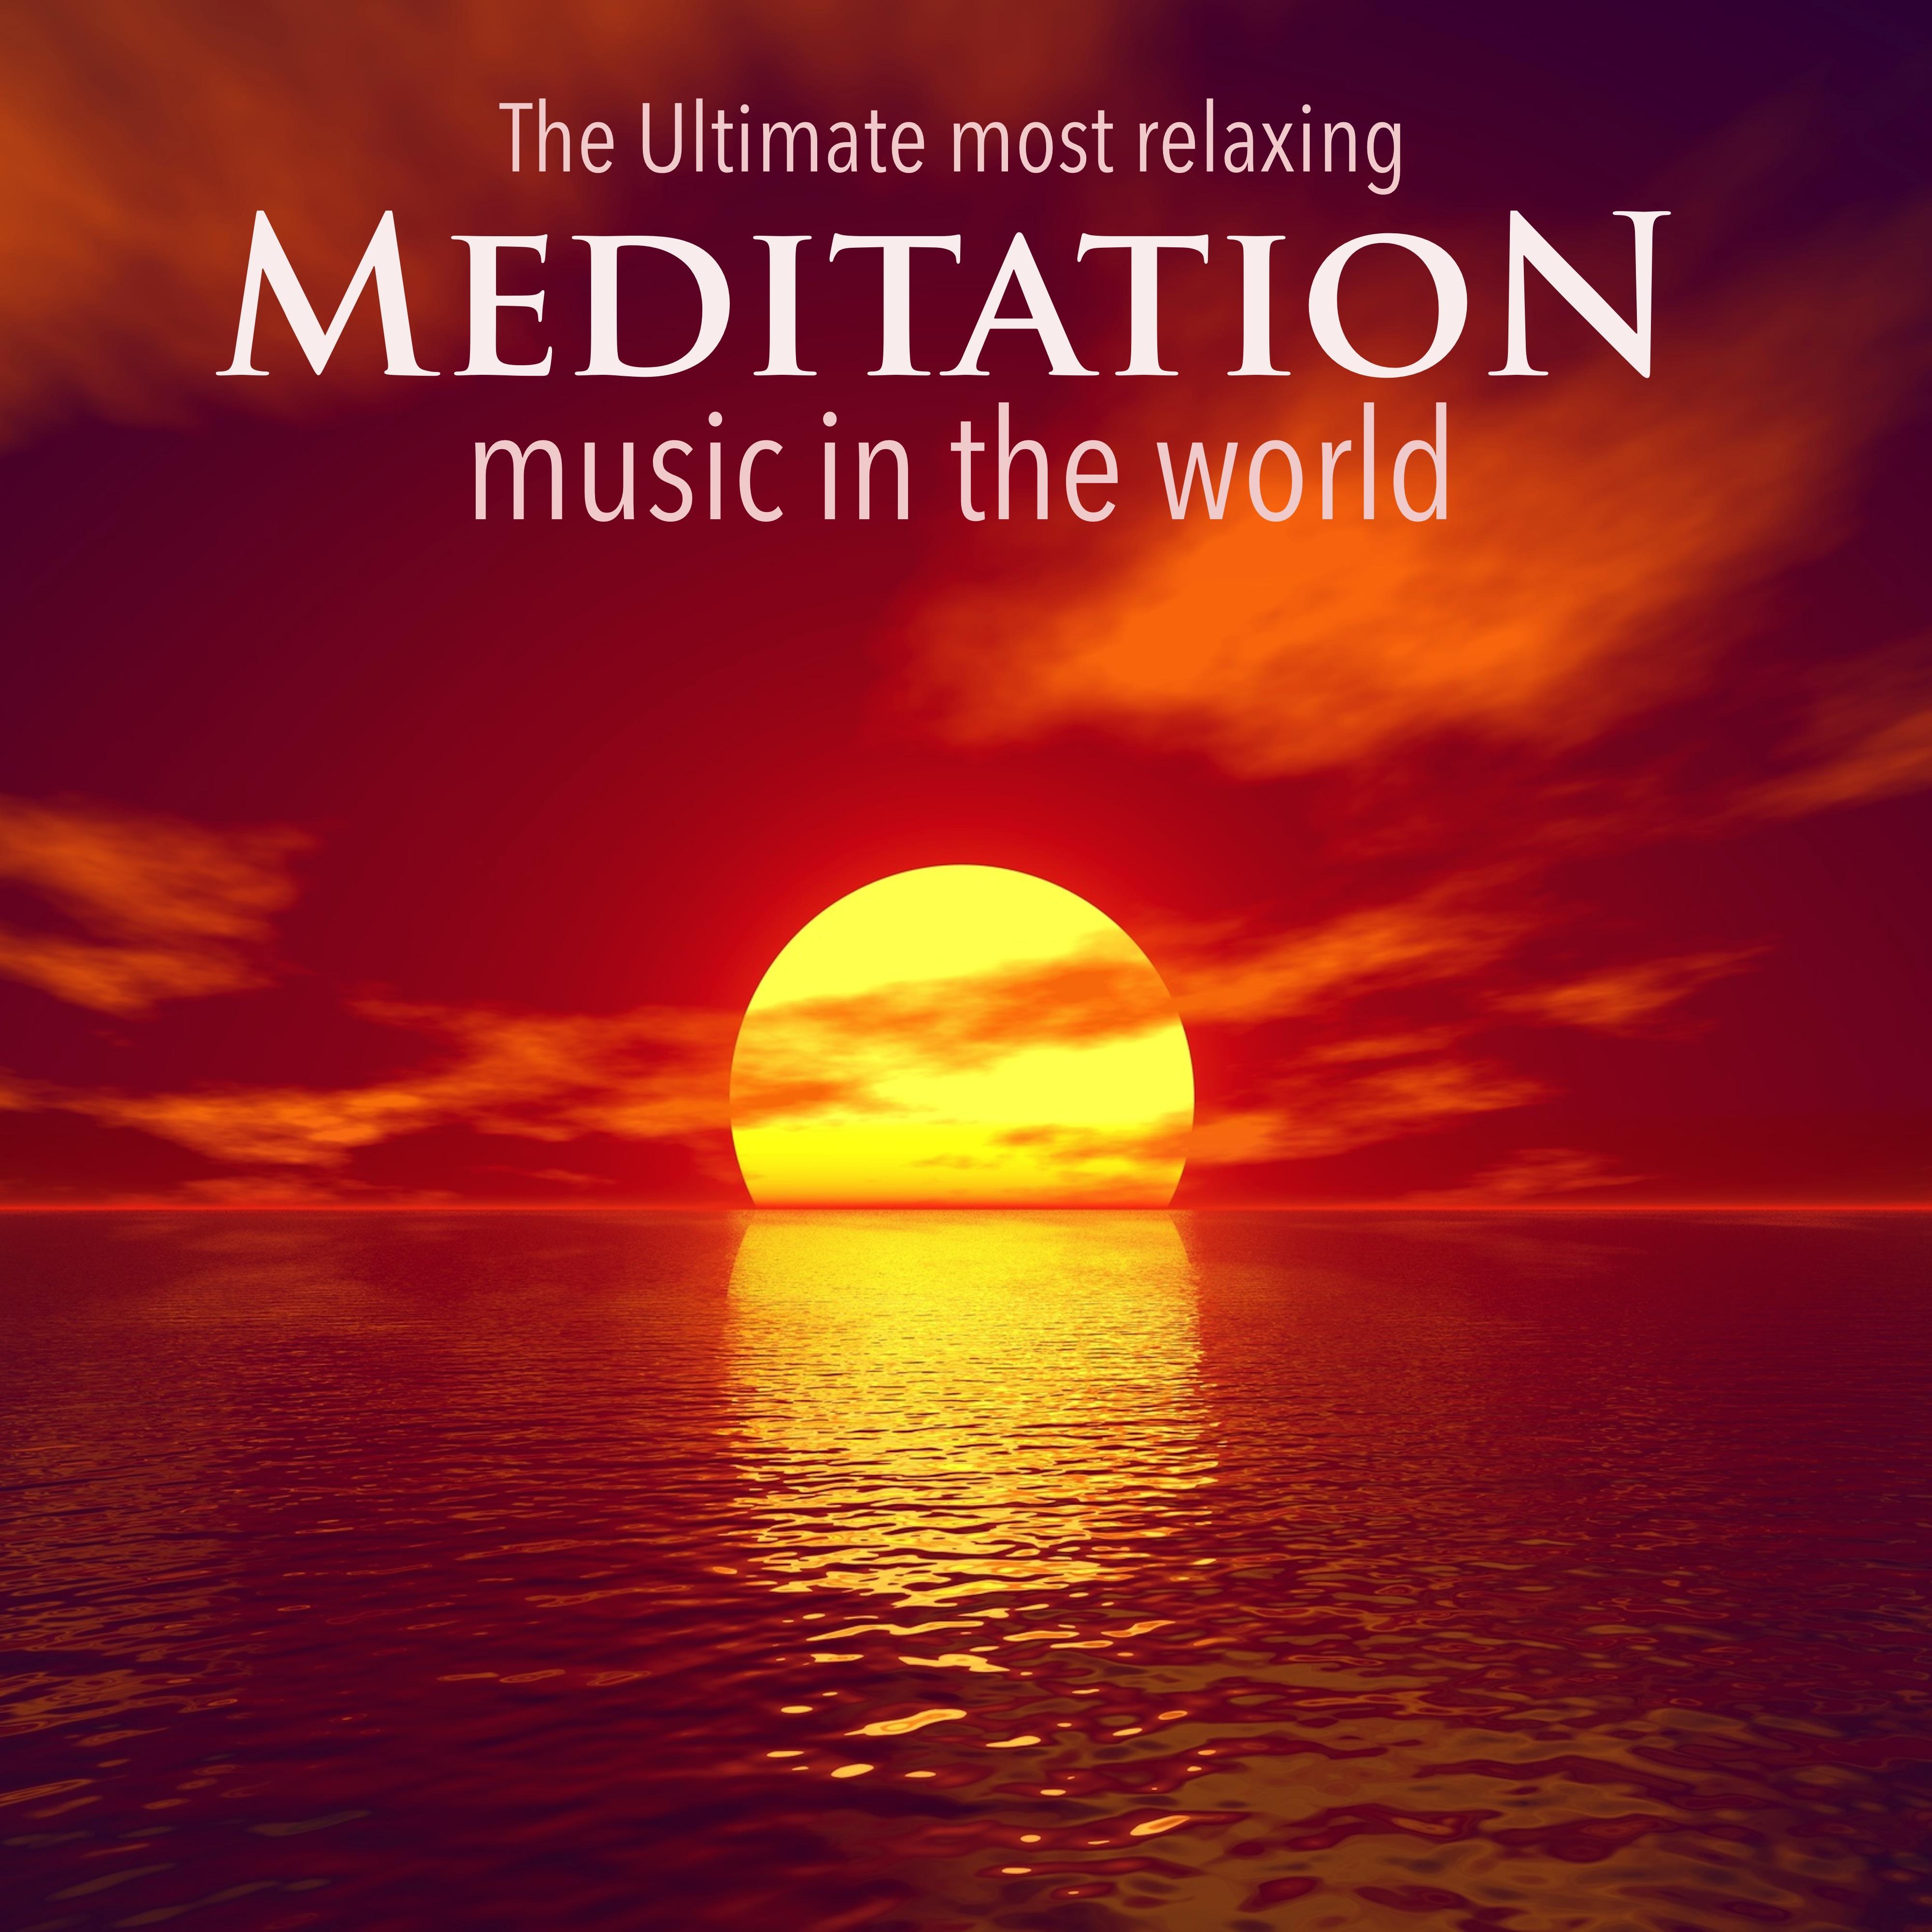 The Ultimate Most Relaxing Meditation Music in the World - Music for Relaxation, Yoga, Sleep, Study, Meditation, Spa and Ambience